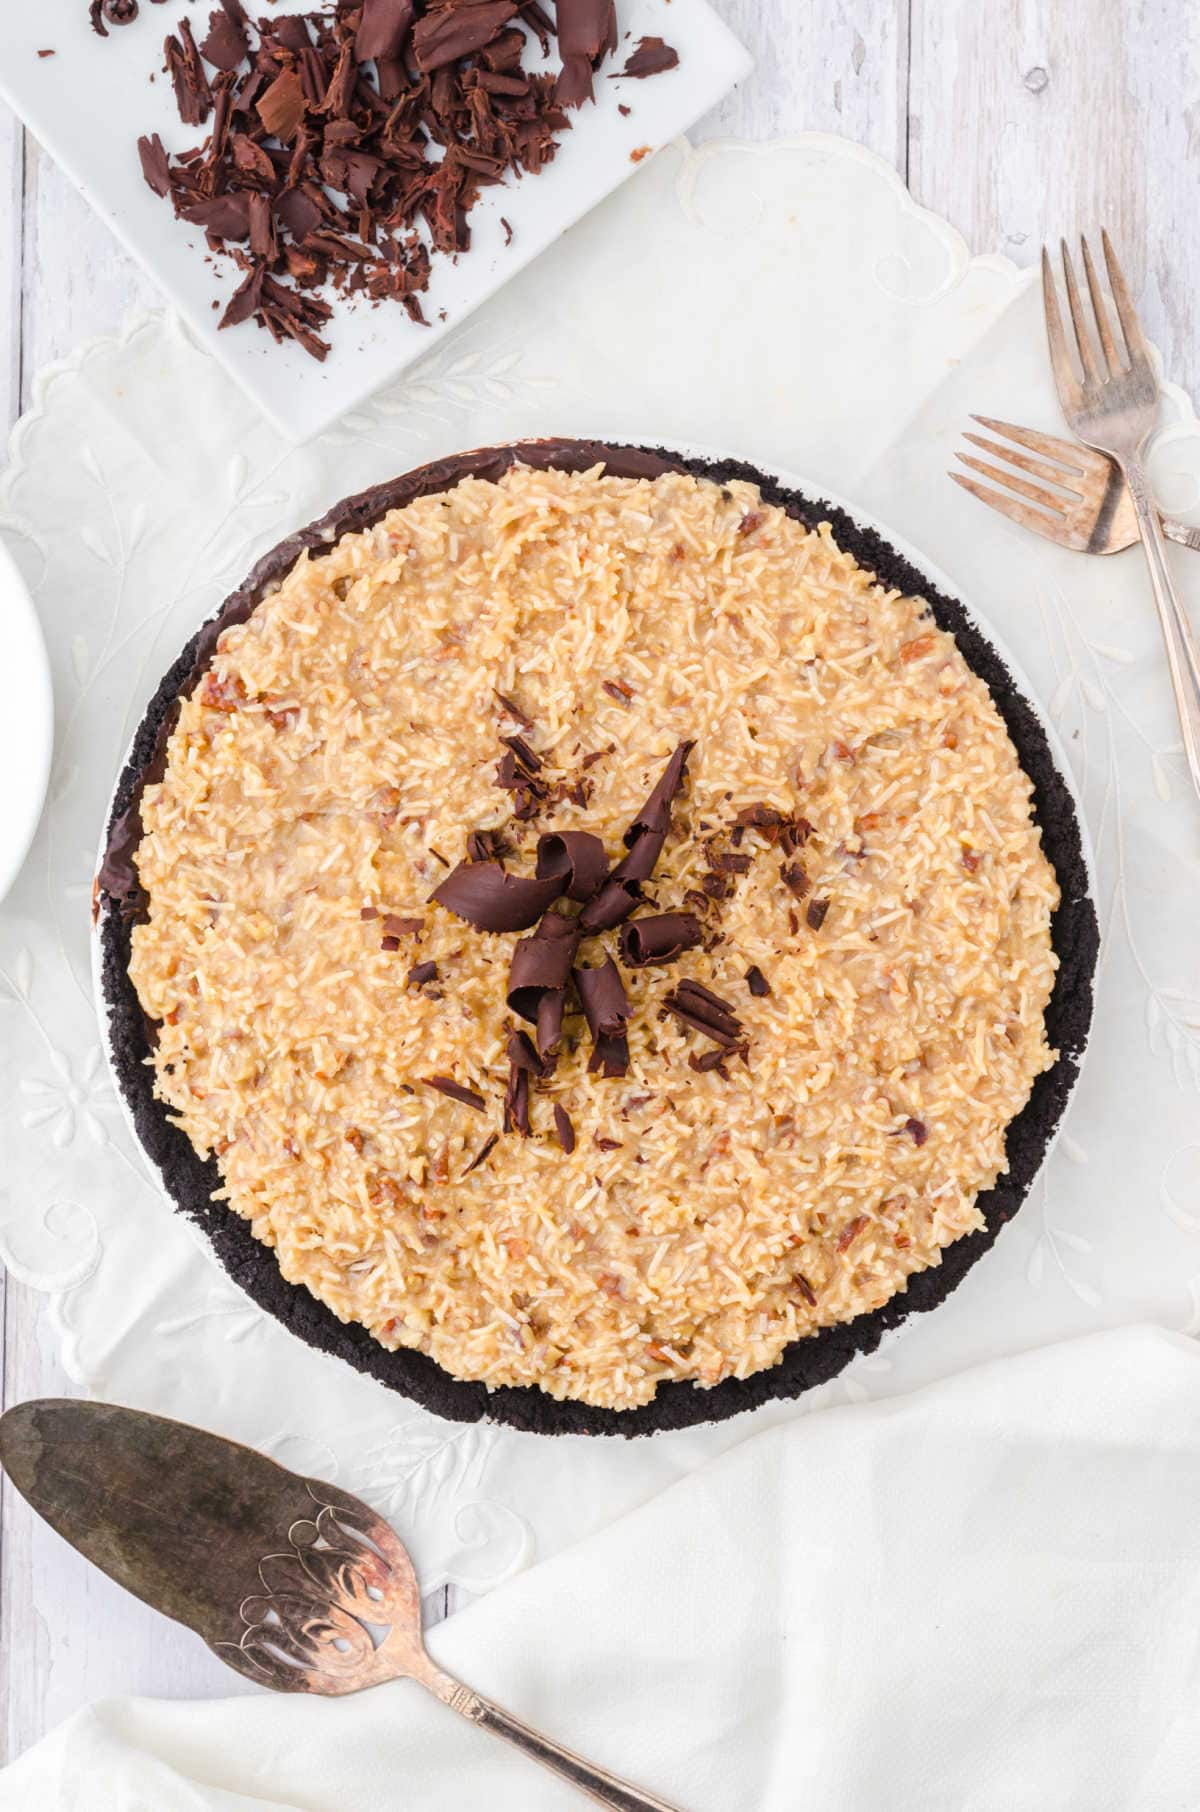 Overhead view of a whole German Chocolate pie.